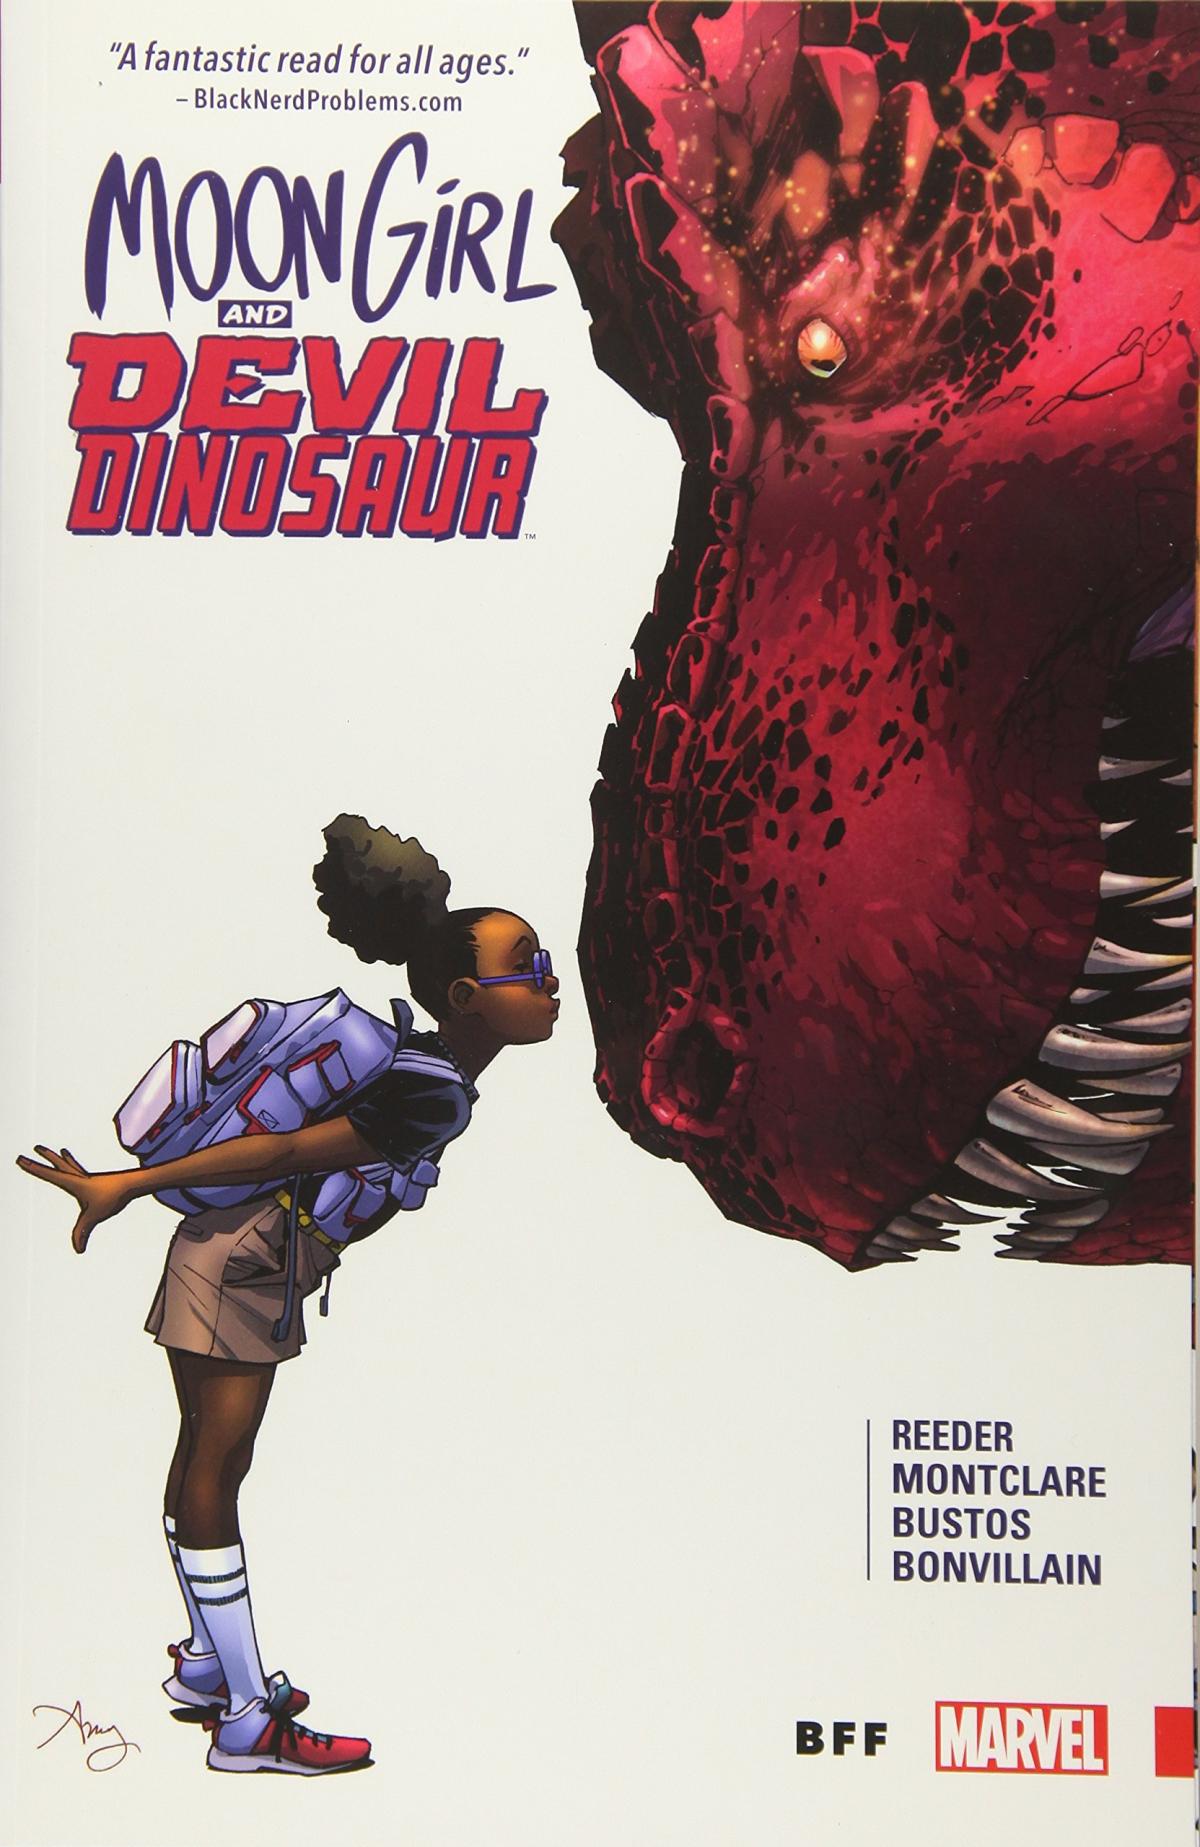 Cover for Moon Girl and Devil Dinosaur book.